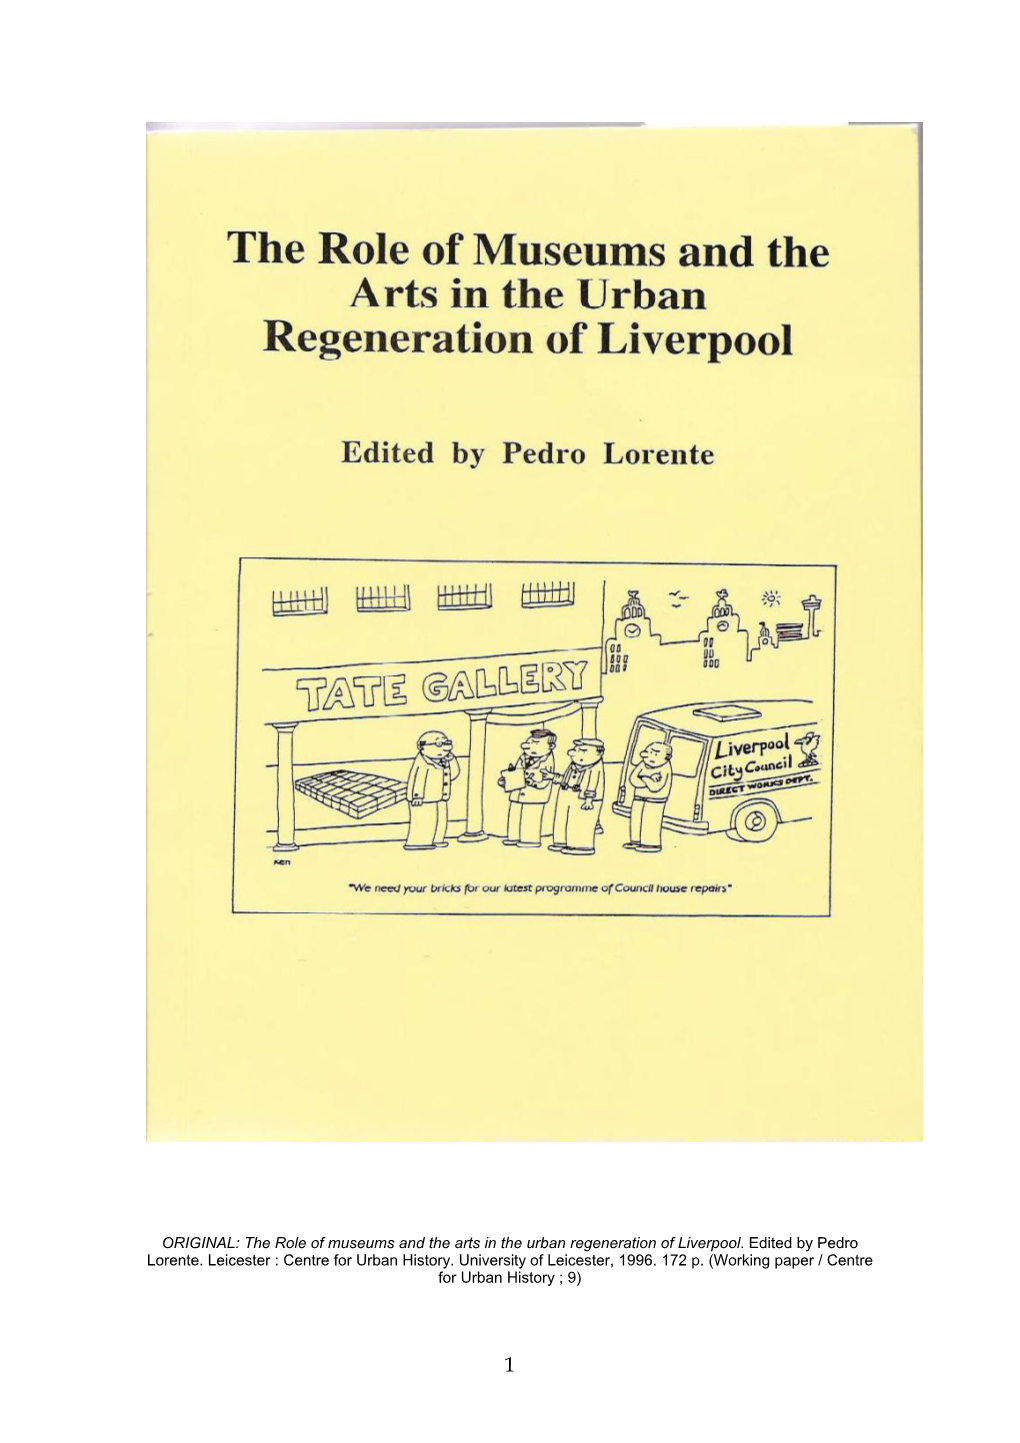 The Role of Museums and the Arts in the Urban Regeneration of Liverpool